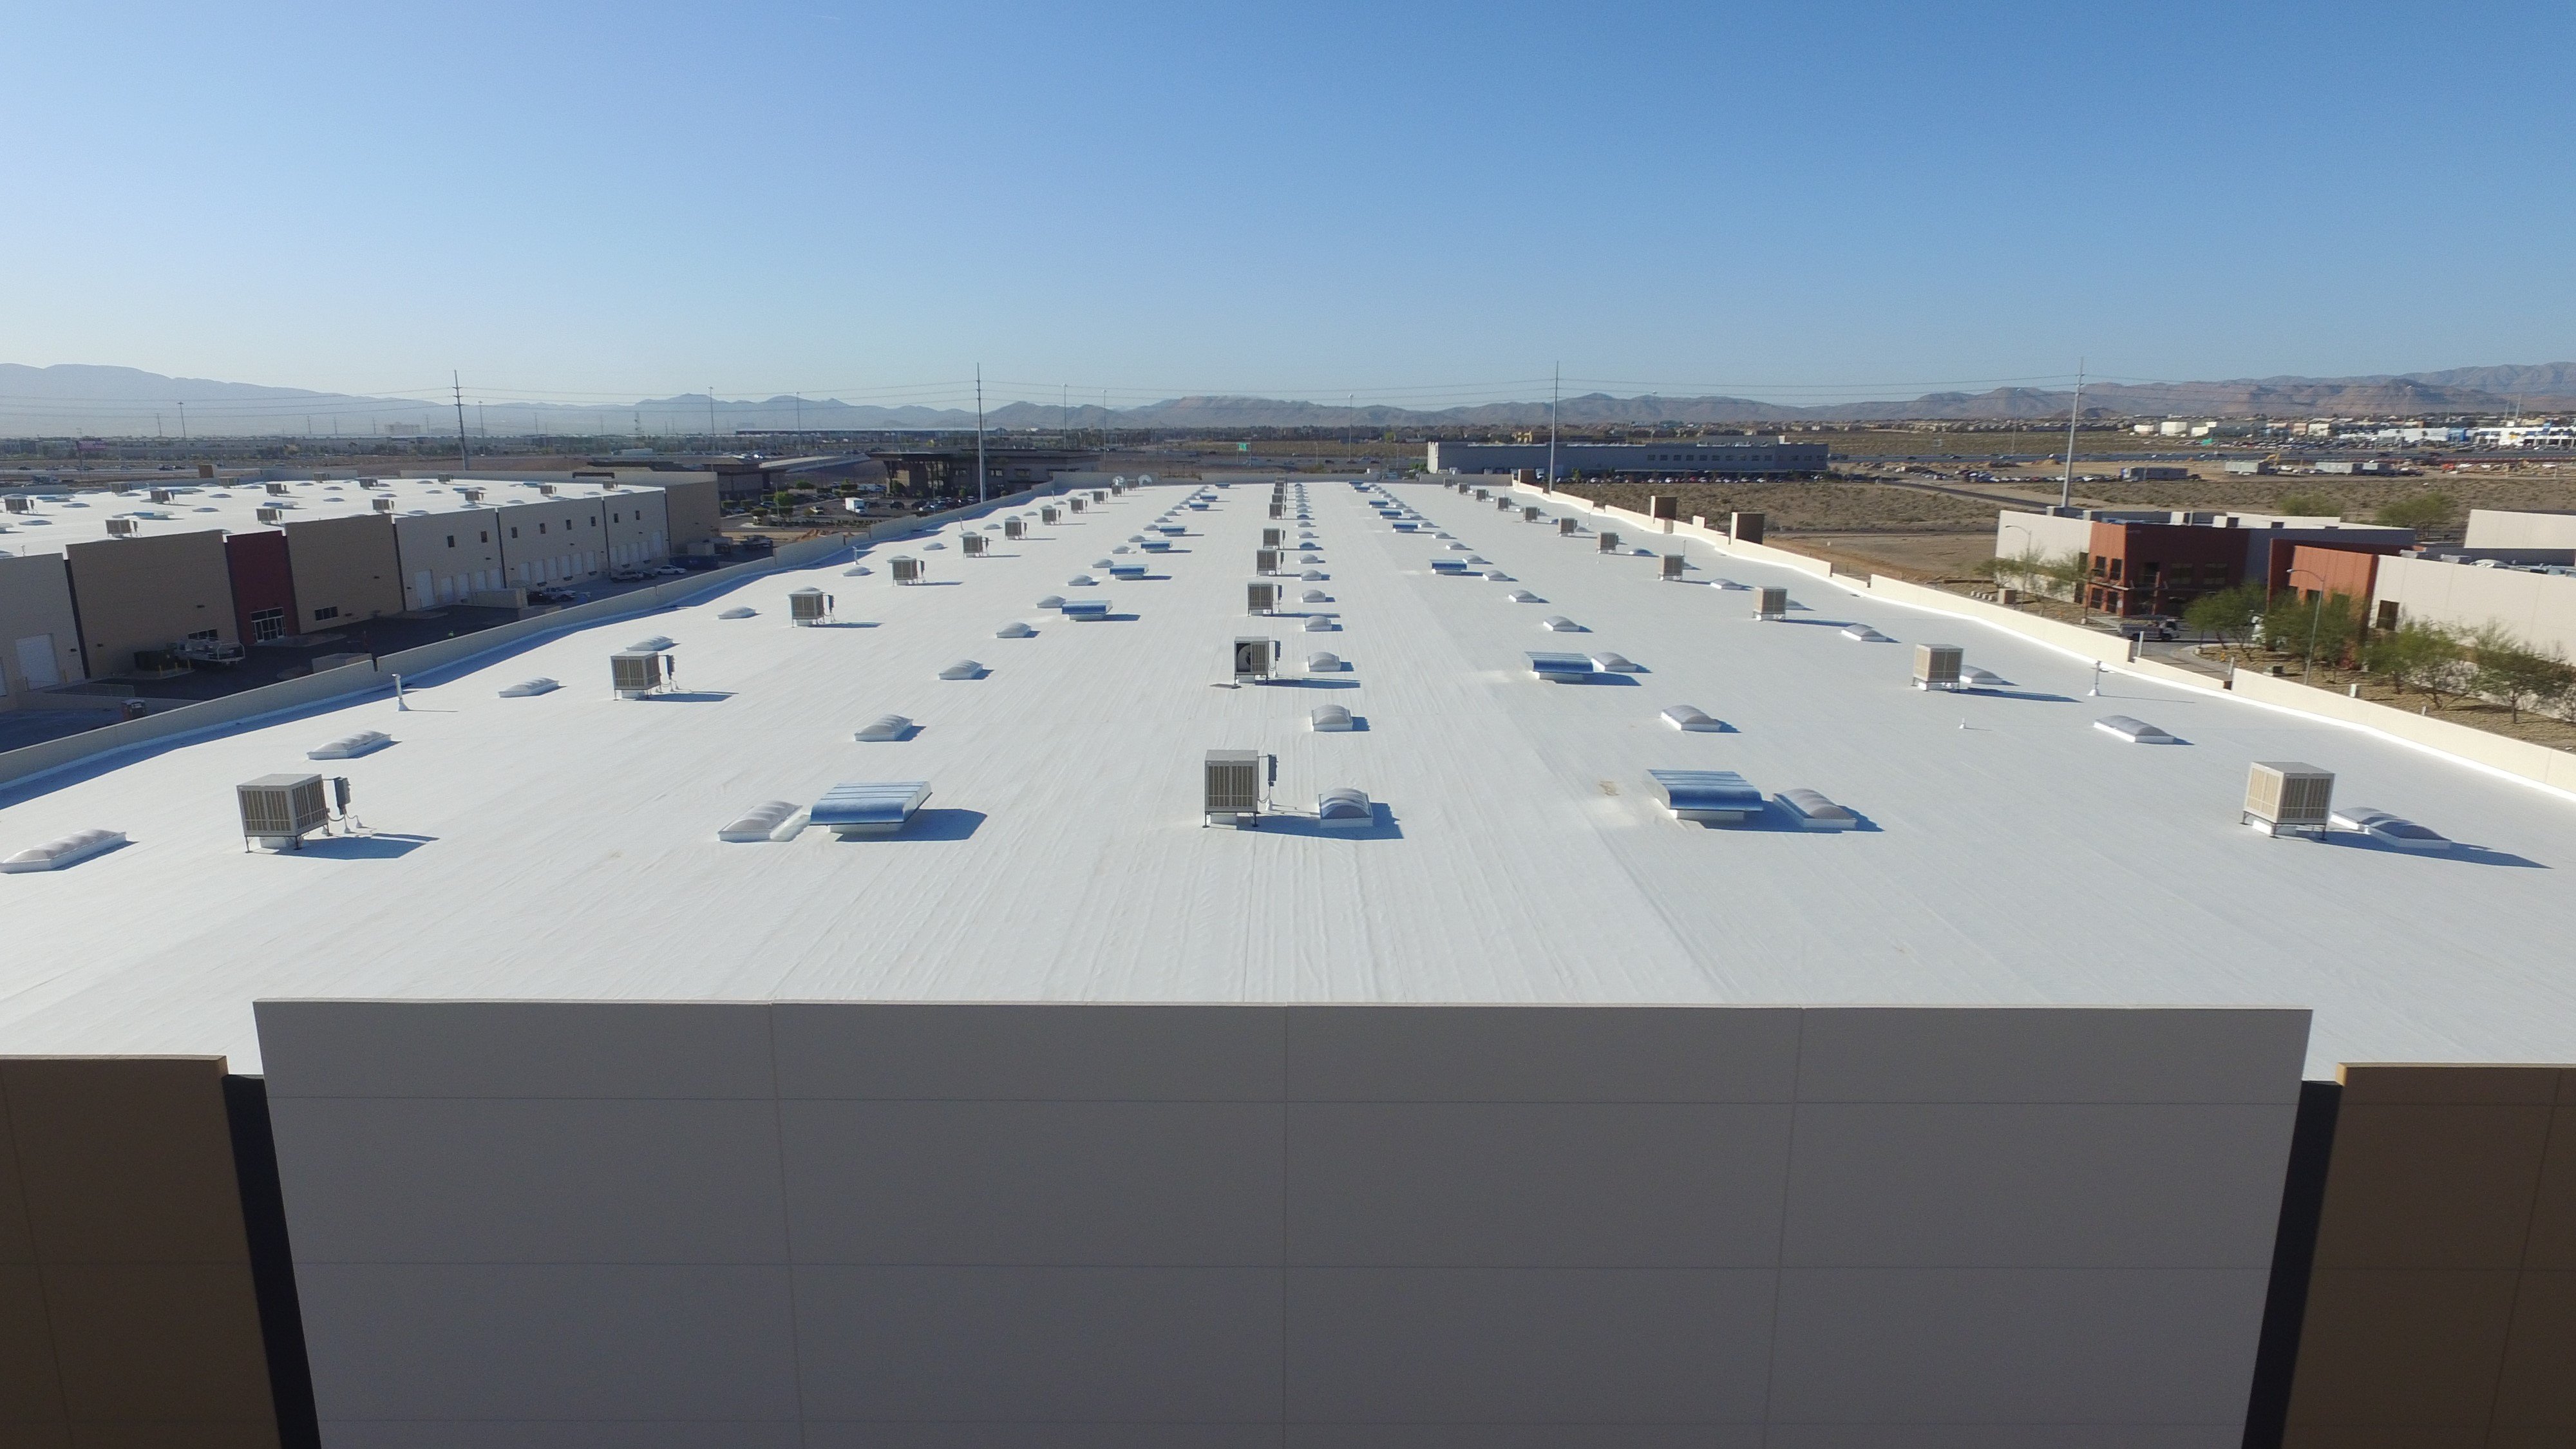 Commercial Single Ply Roof